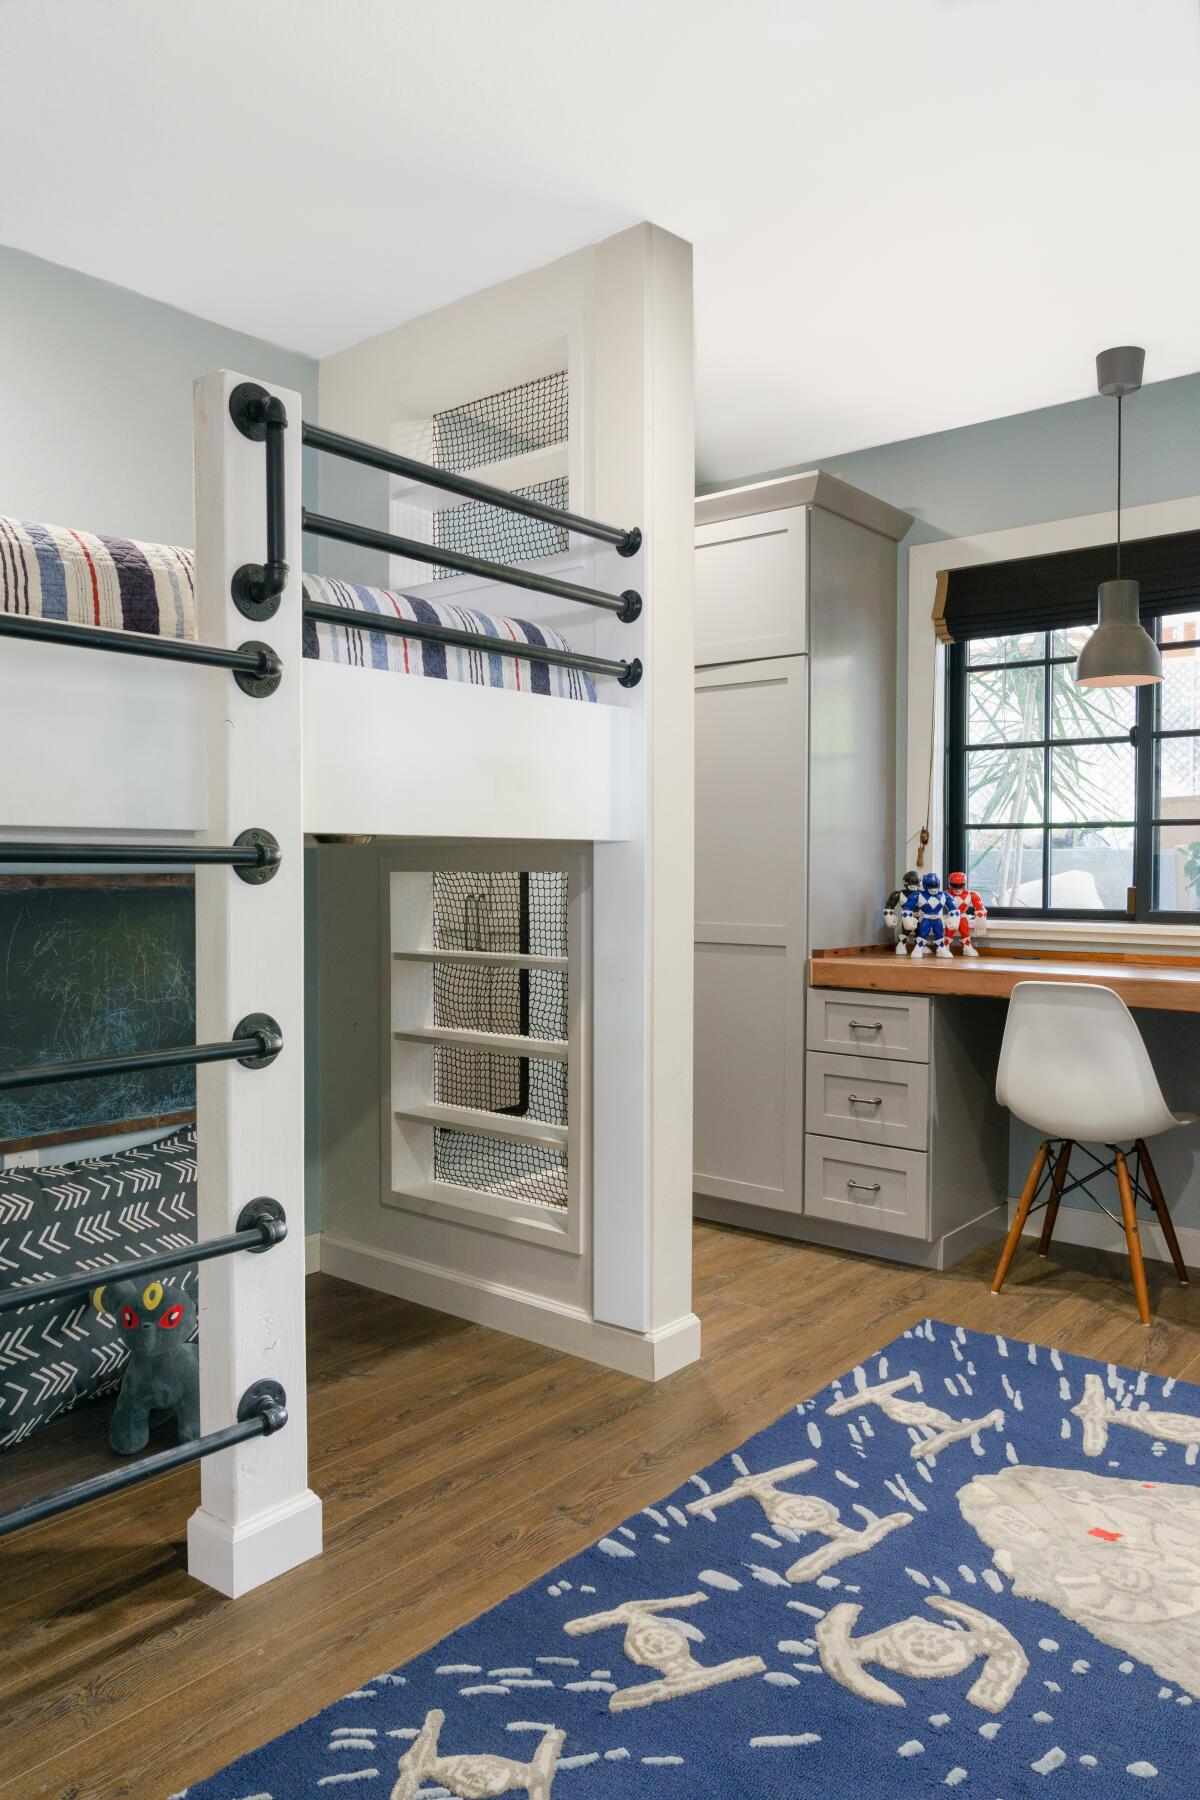 Built-ins provide storage in the "farmhouse luxe" boys room, with desk space adjacent.